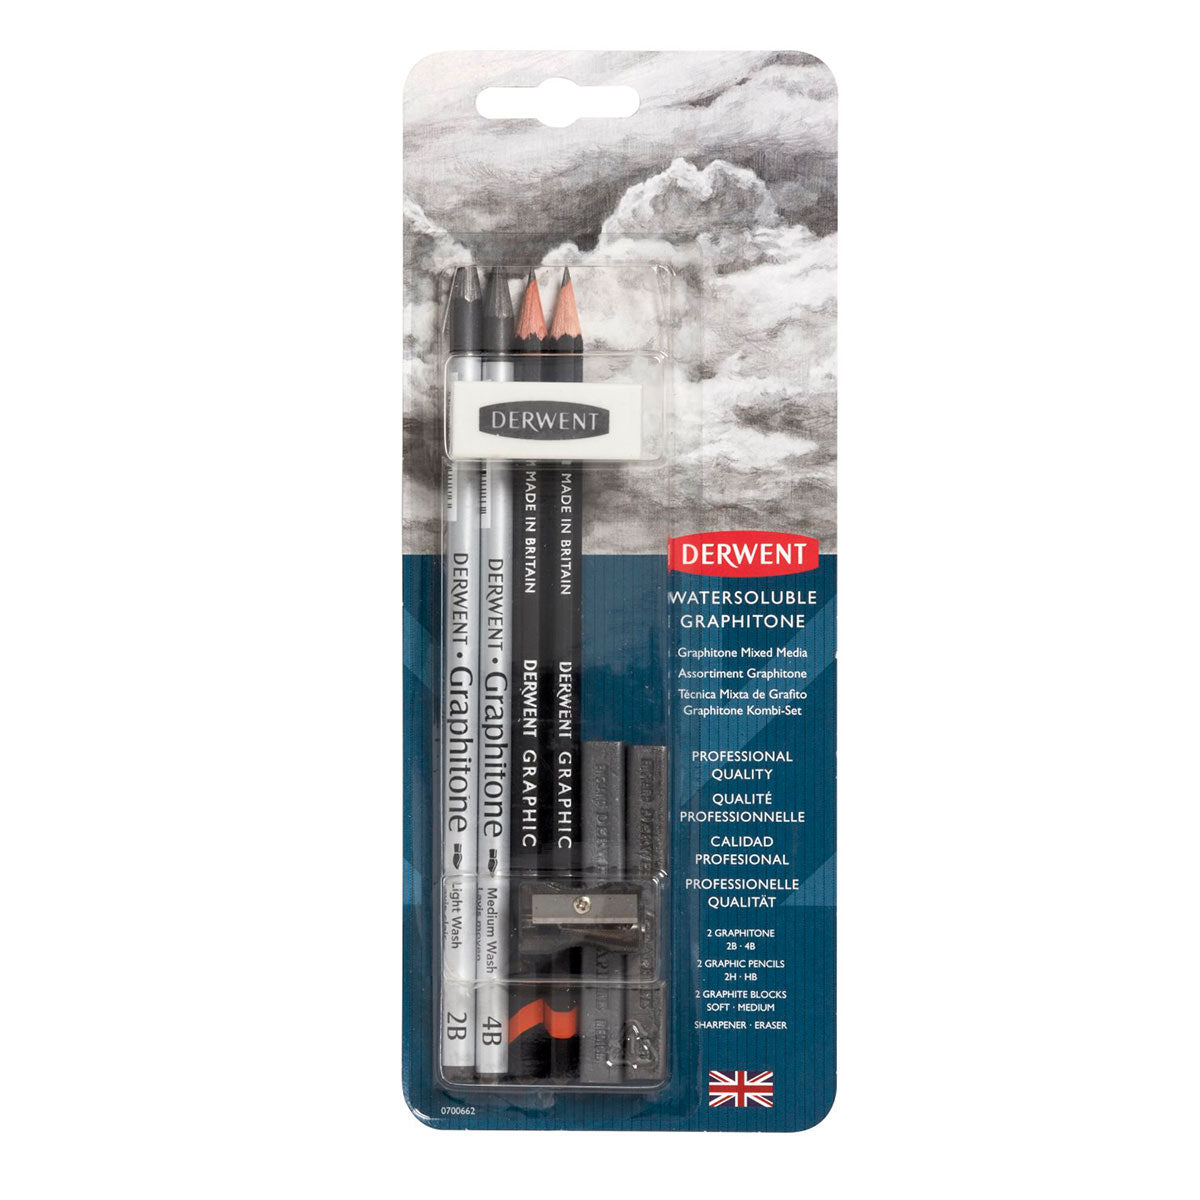 Derwent - Graphitone Watersoluble Sketching Pencils Mixed Media pack.